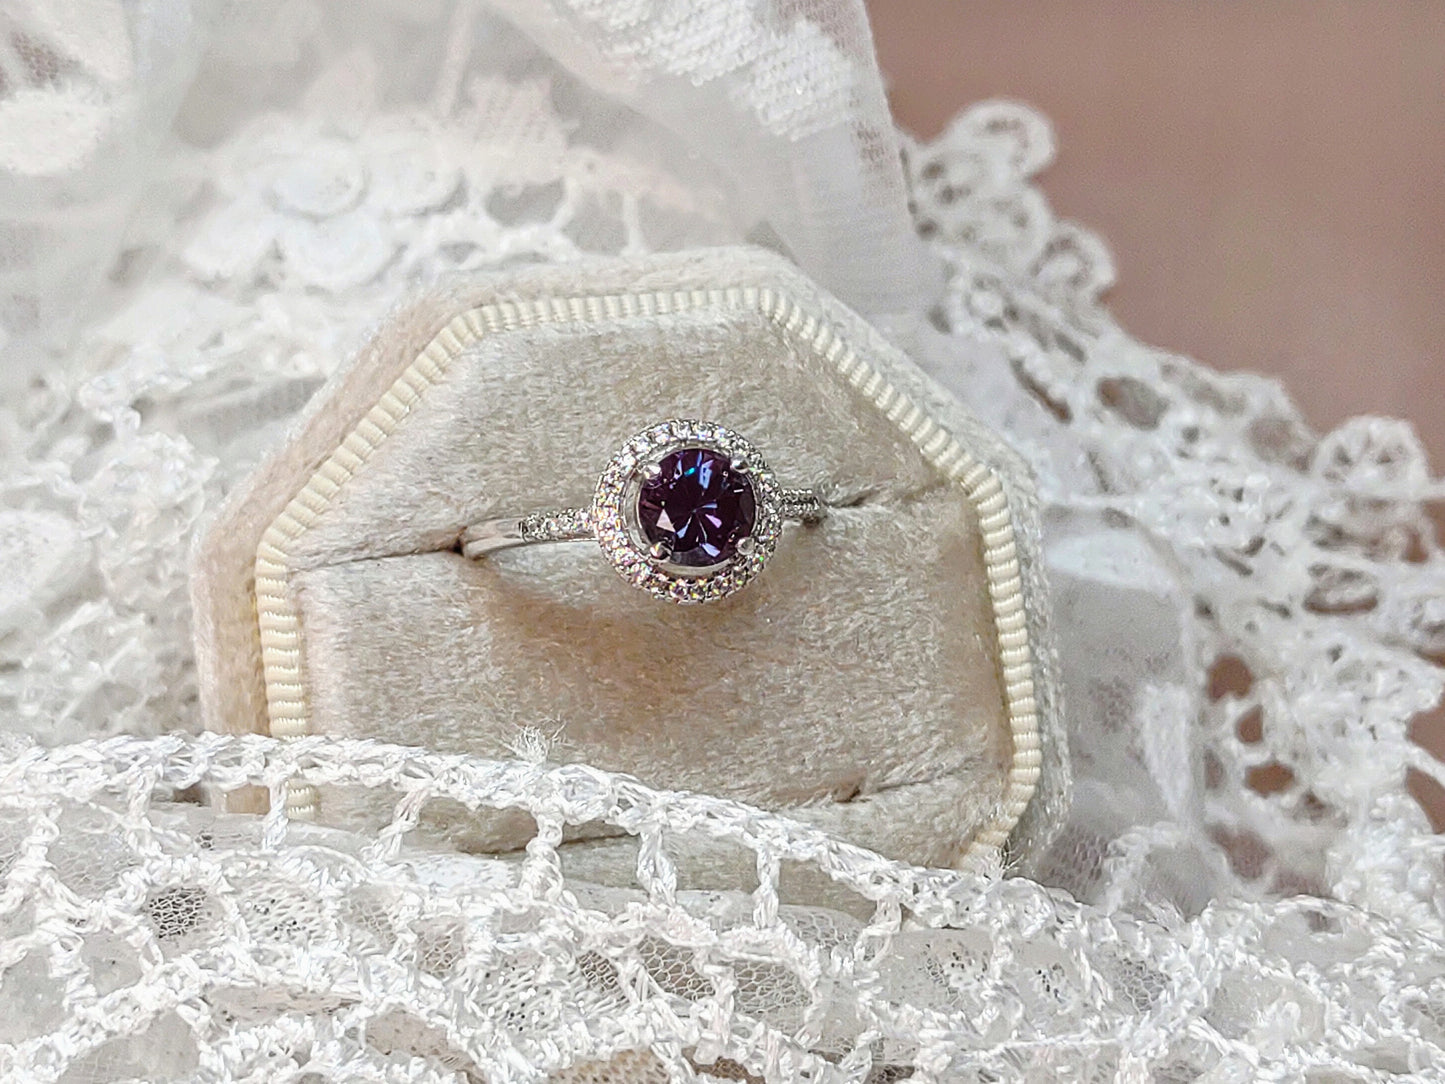 A silver halo ring set with a round dark purple and green lab grown alexandrite gem.